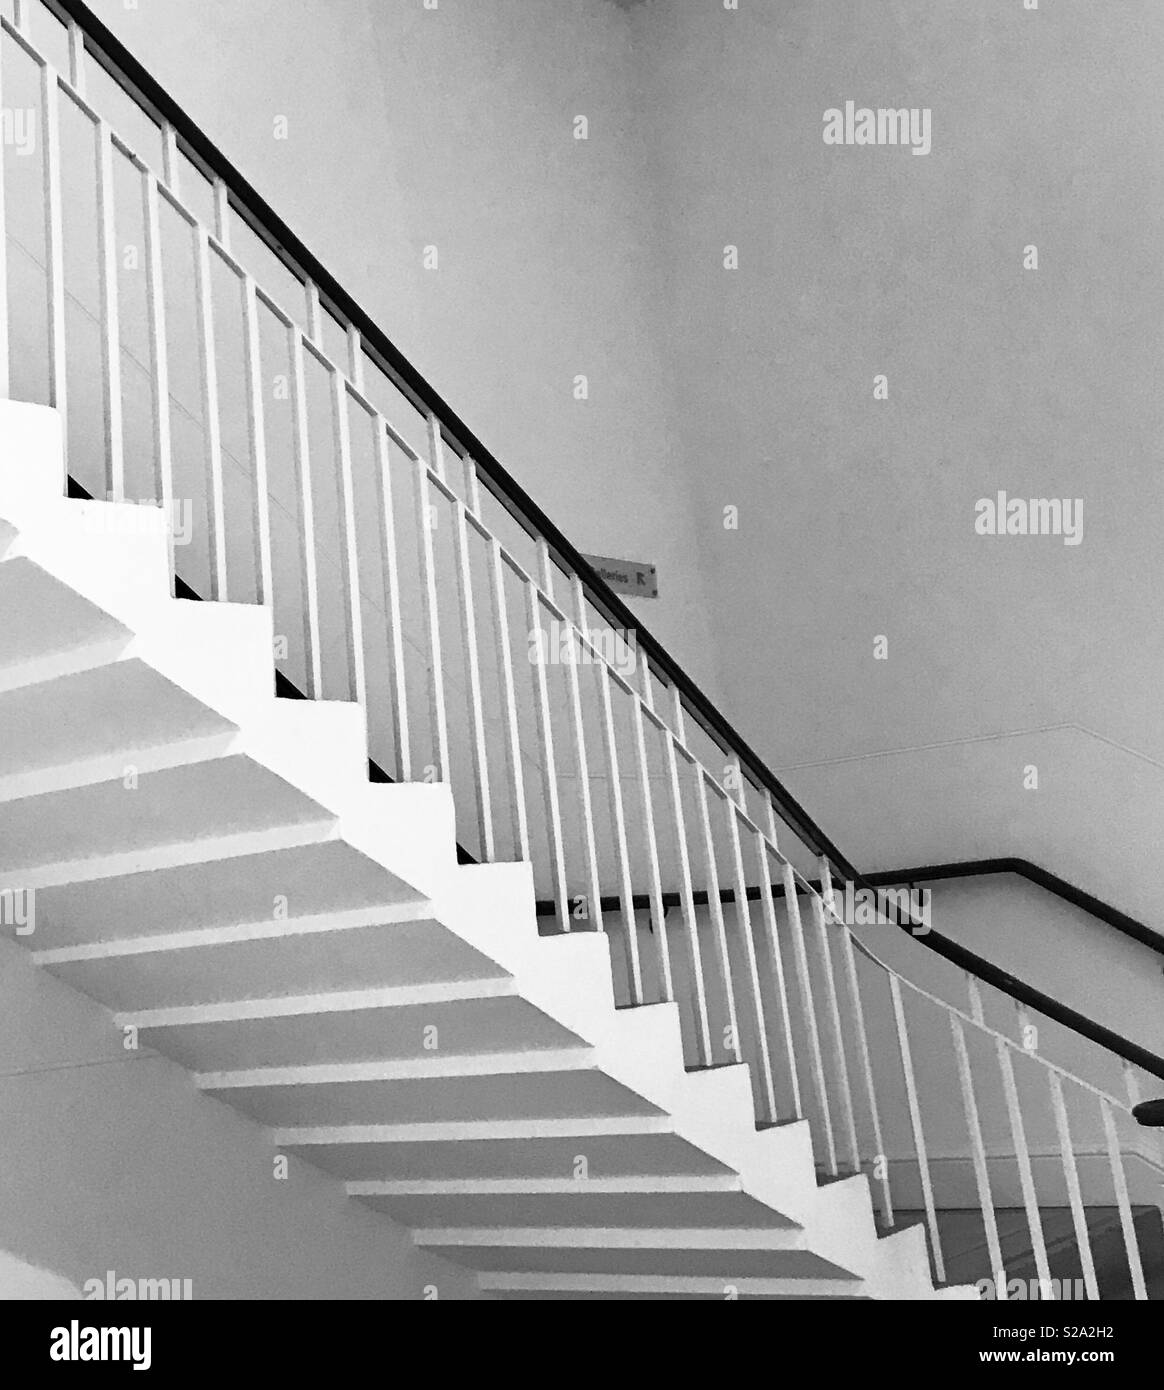 Saatchi Gallery Chelsea London staircase Stock Photo